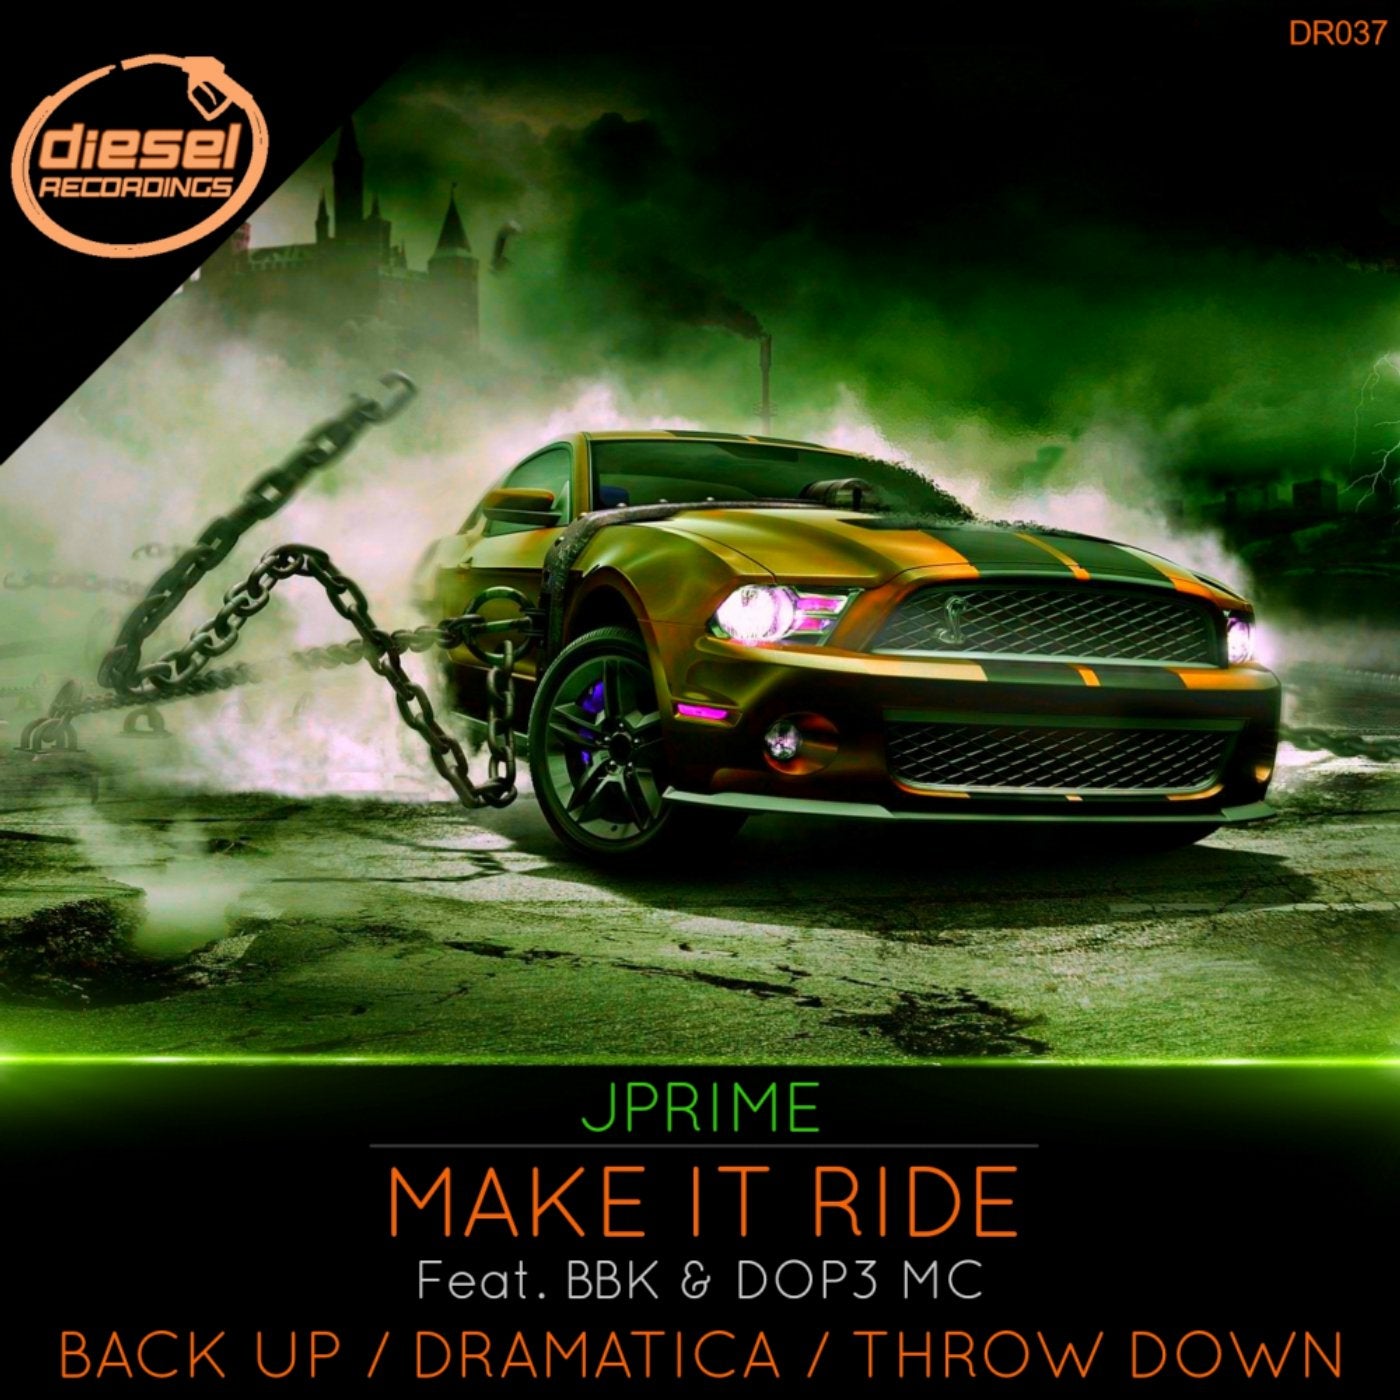 Make It Ride / Back Up / Dramatica / Throw Down